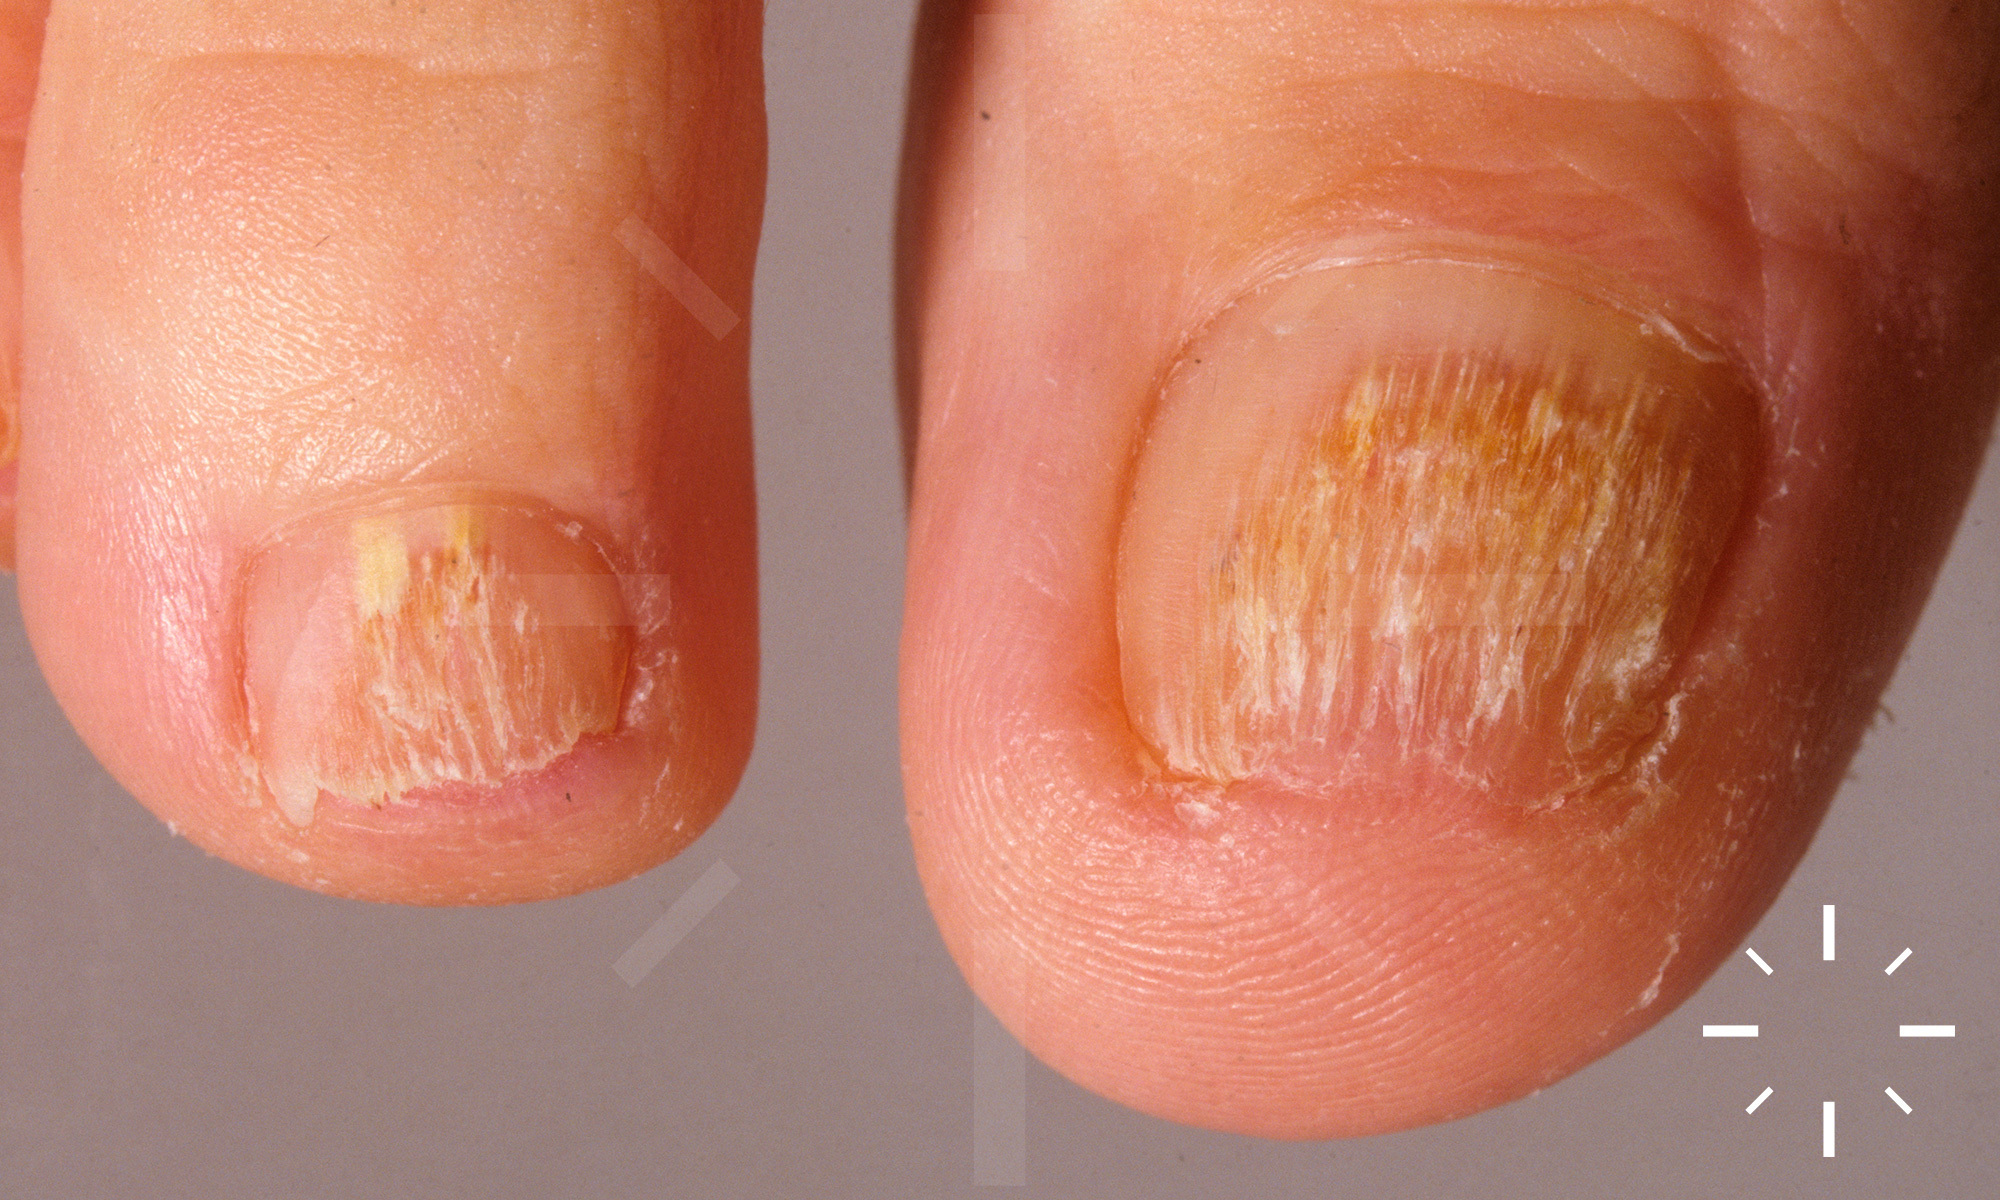 Nail Pitting: Causes, Treatment, and Prevention - GoodRx